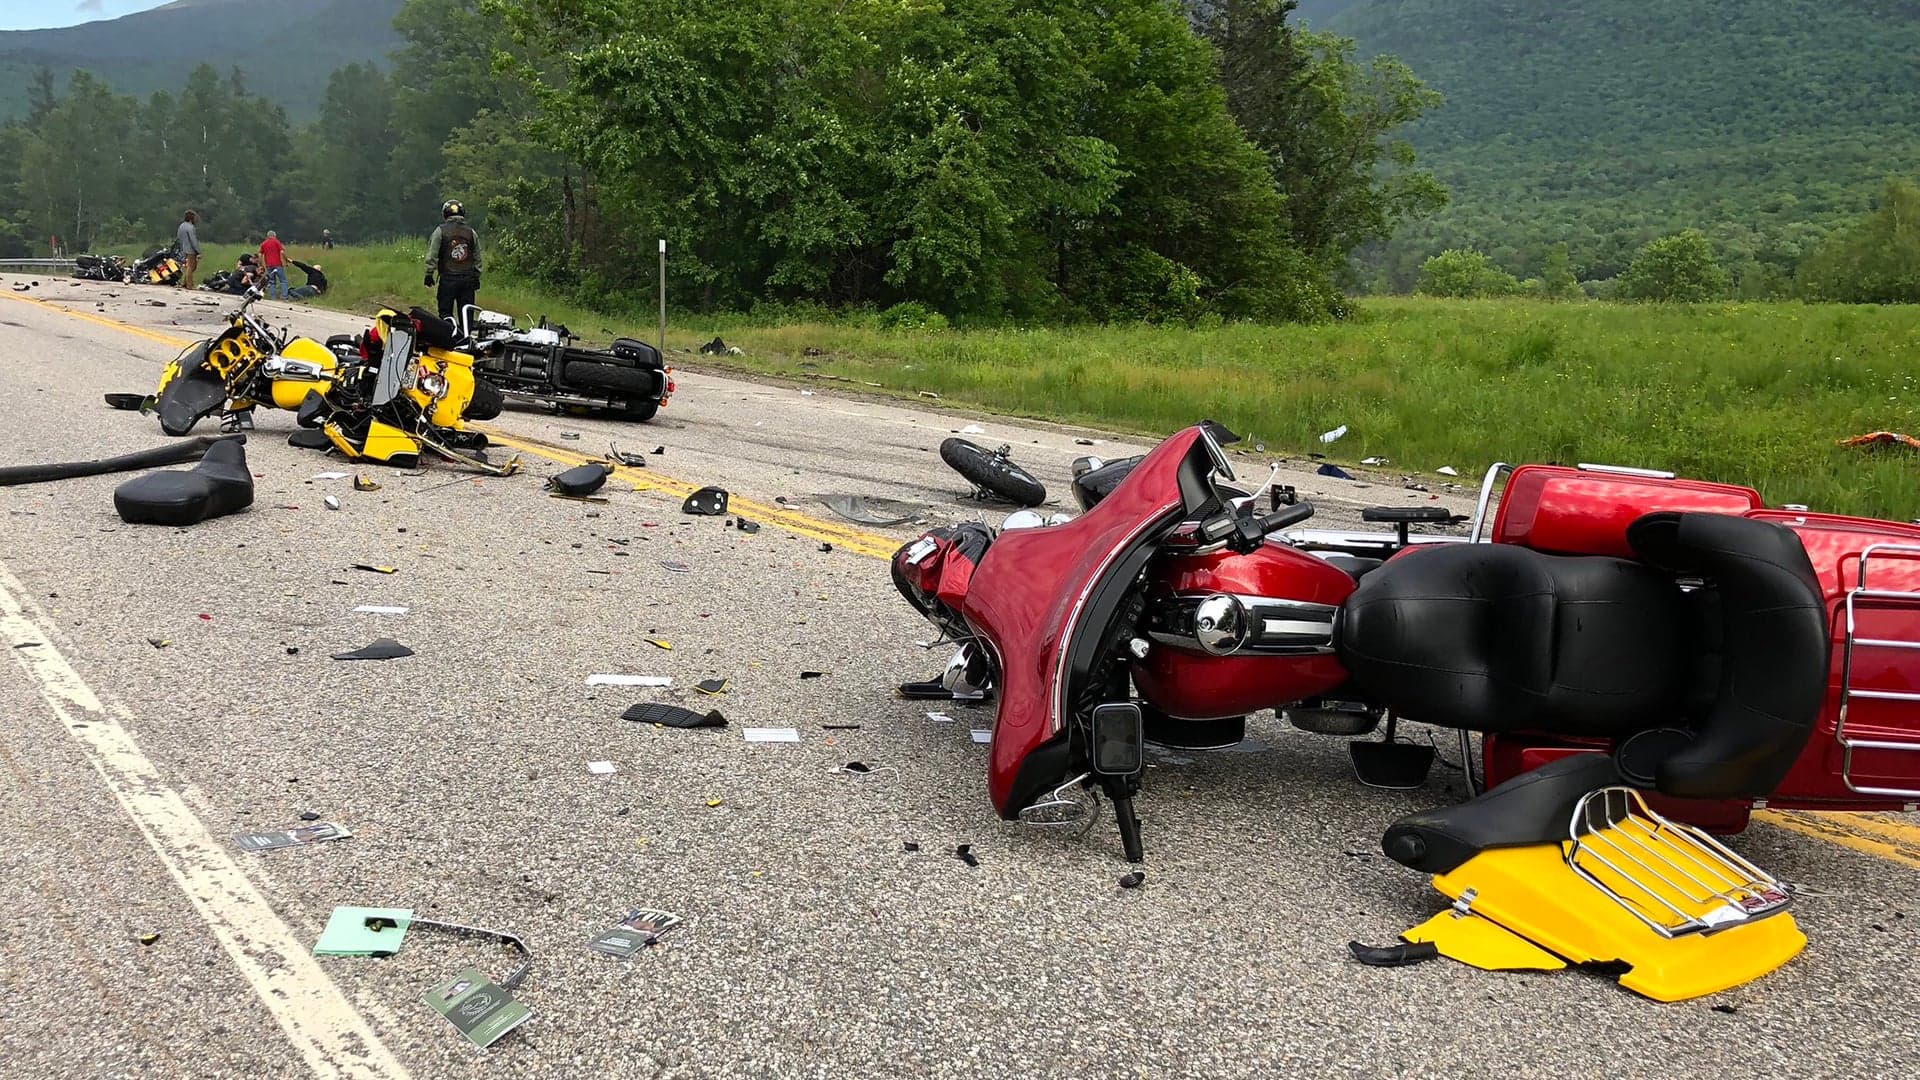 Seven People Dead After Pickup Truck Crashes Into Pack of Motorcyclists in New Hampshire